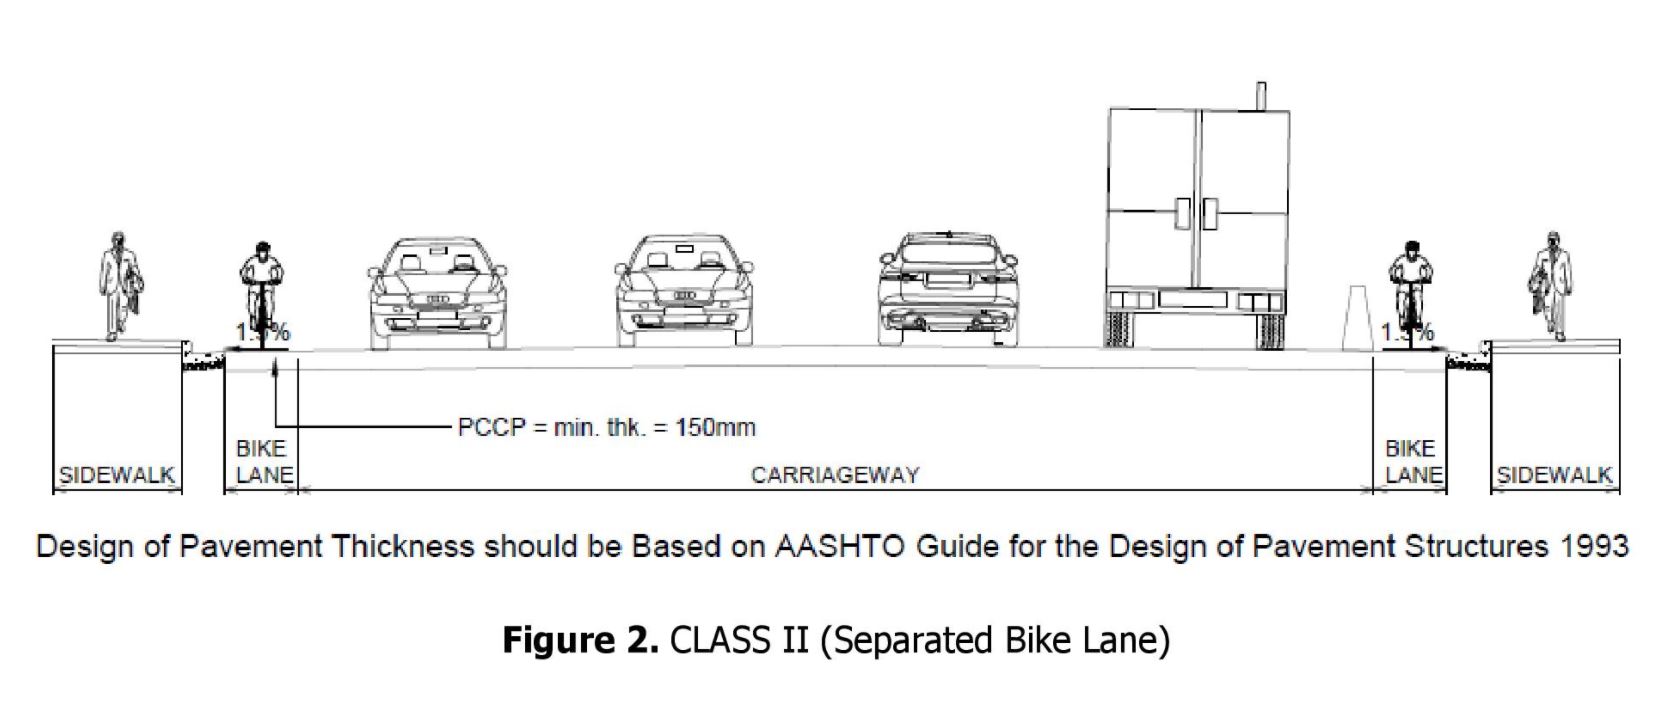 Bike lane design perspective. Image from DPWH.